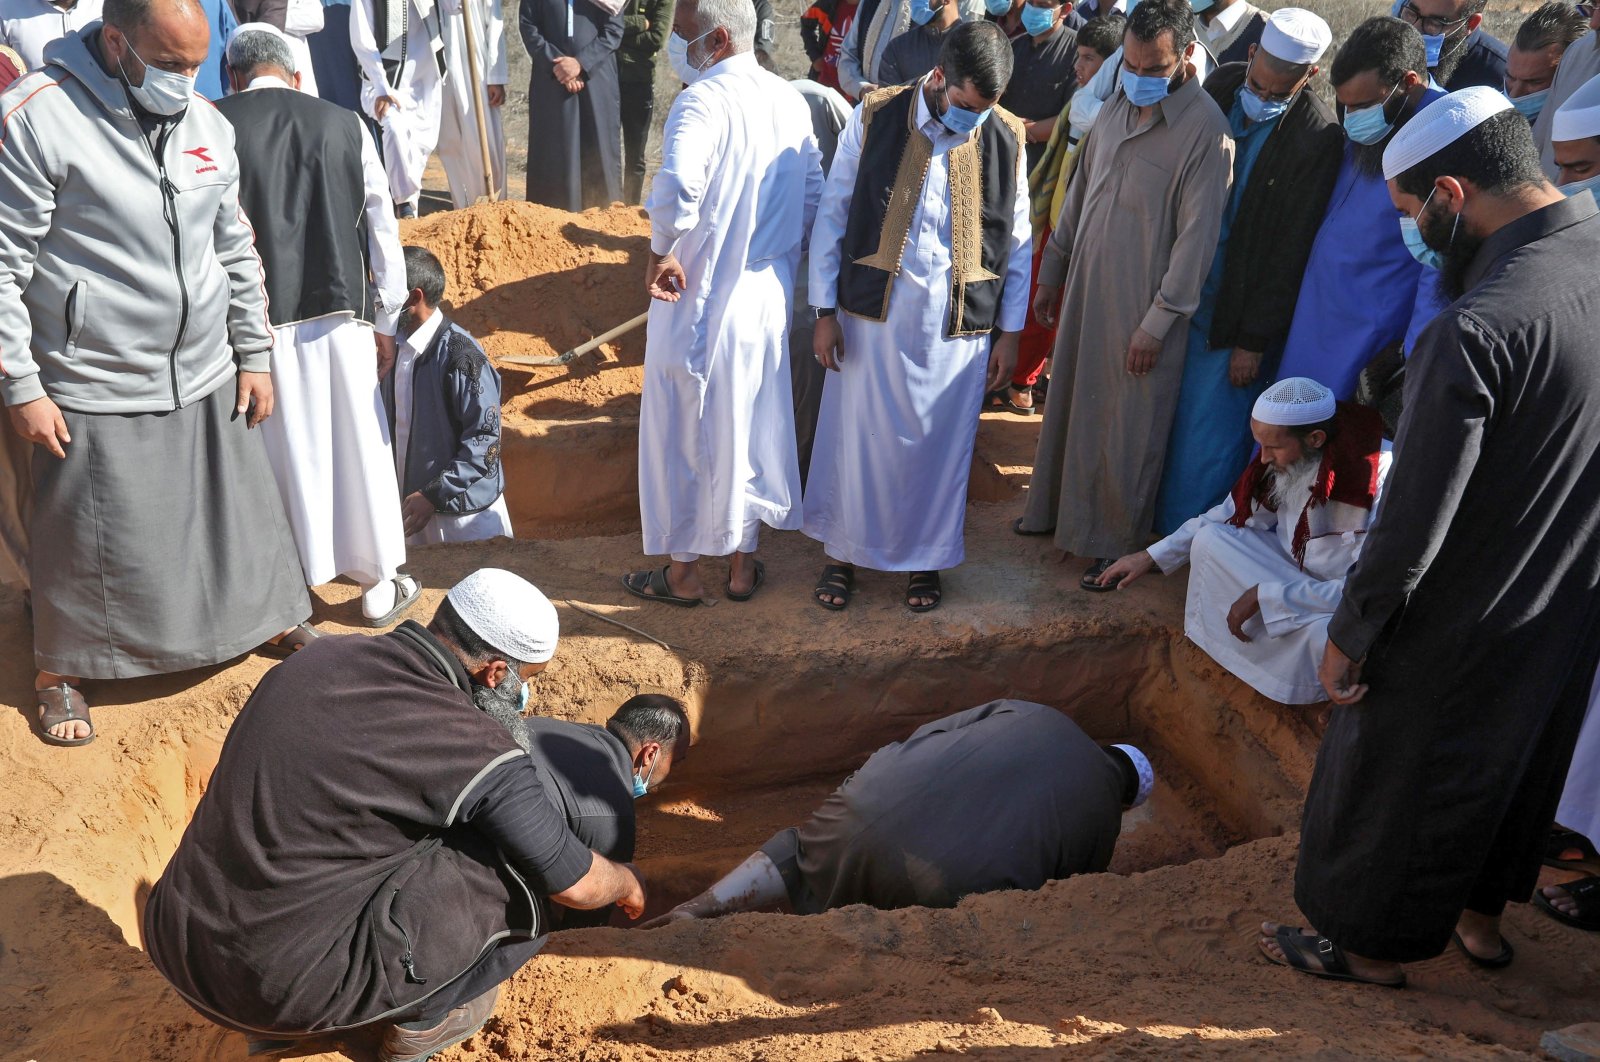 Libyan mourners bury a body, that has been unearthed from a mass grave, in a cemetery in the city of Tarhuna on Nov. 13, 2020. (AFP Photo)